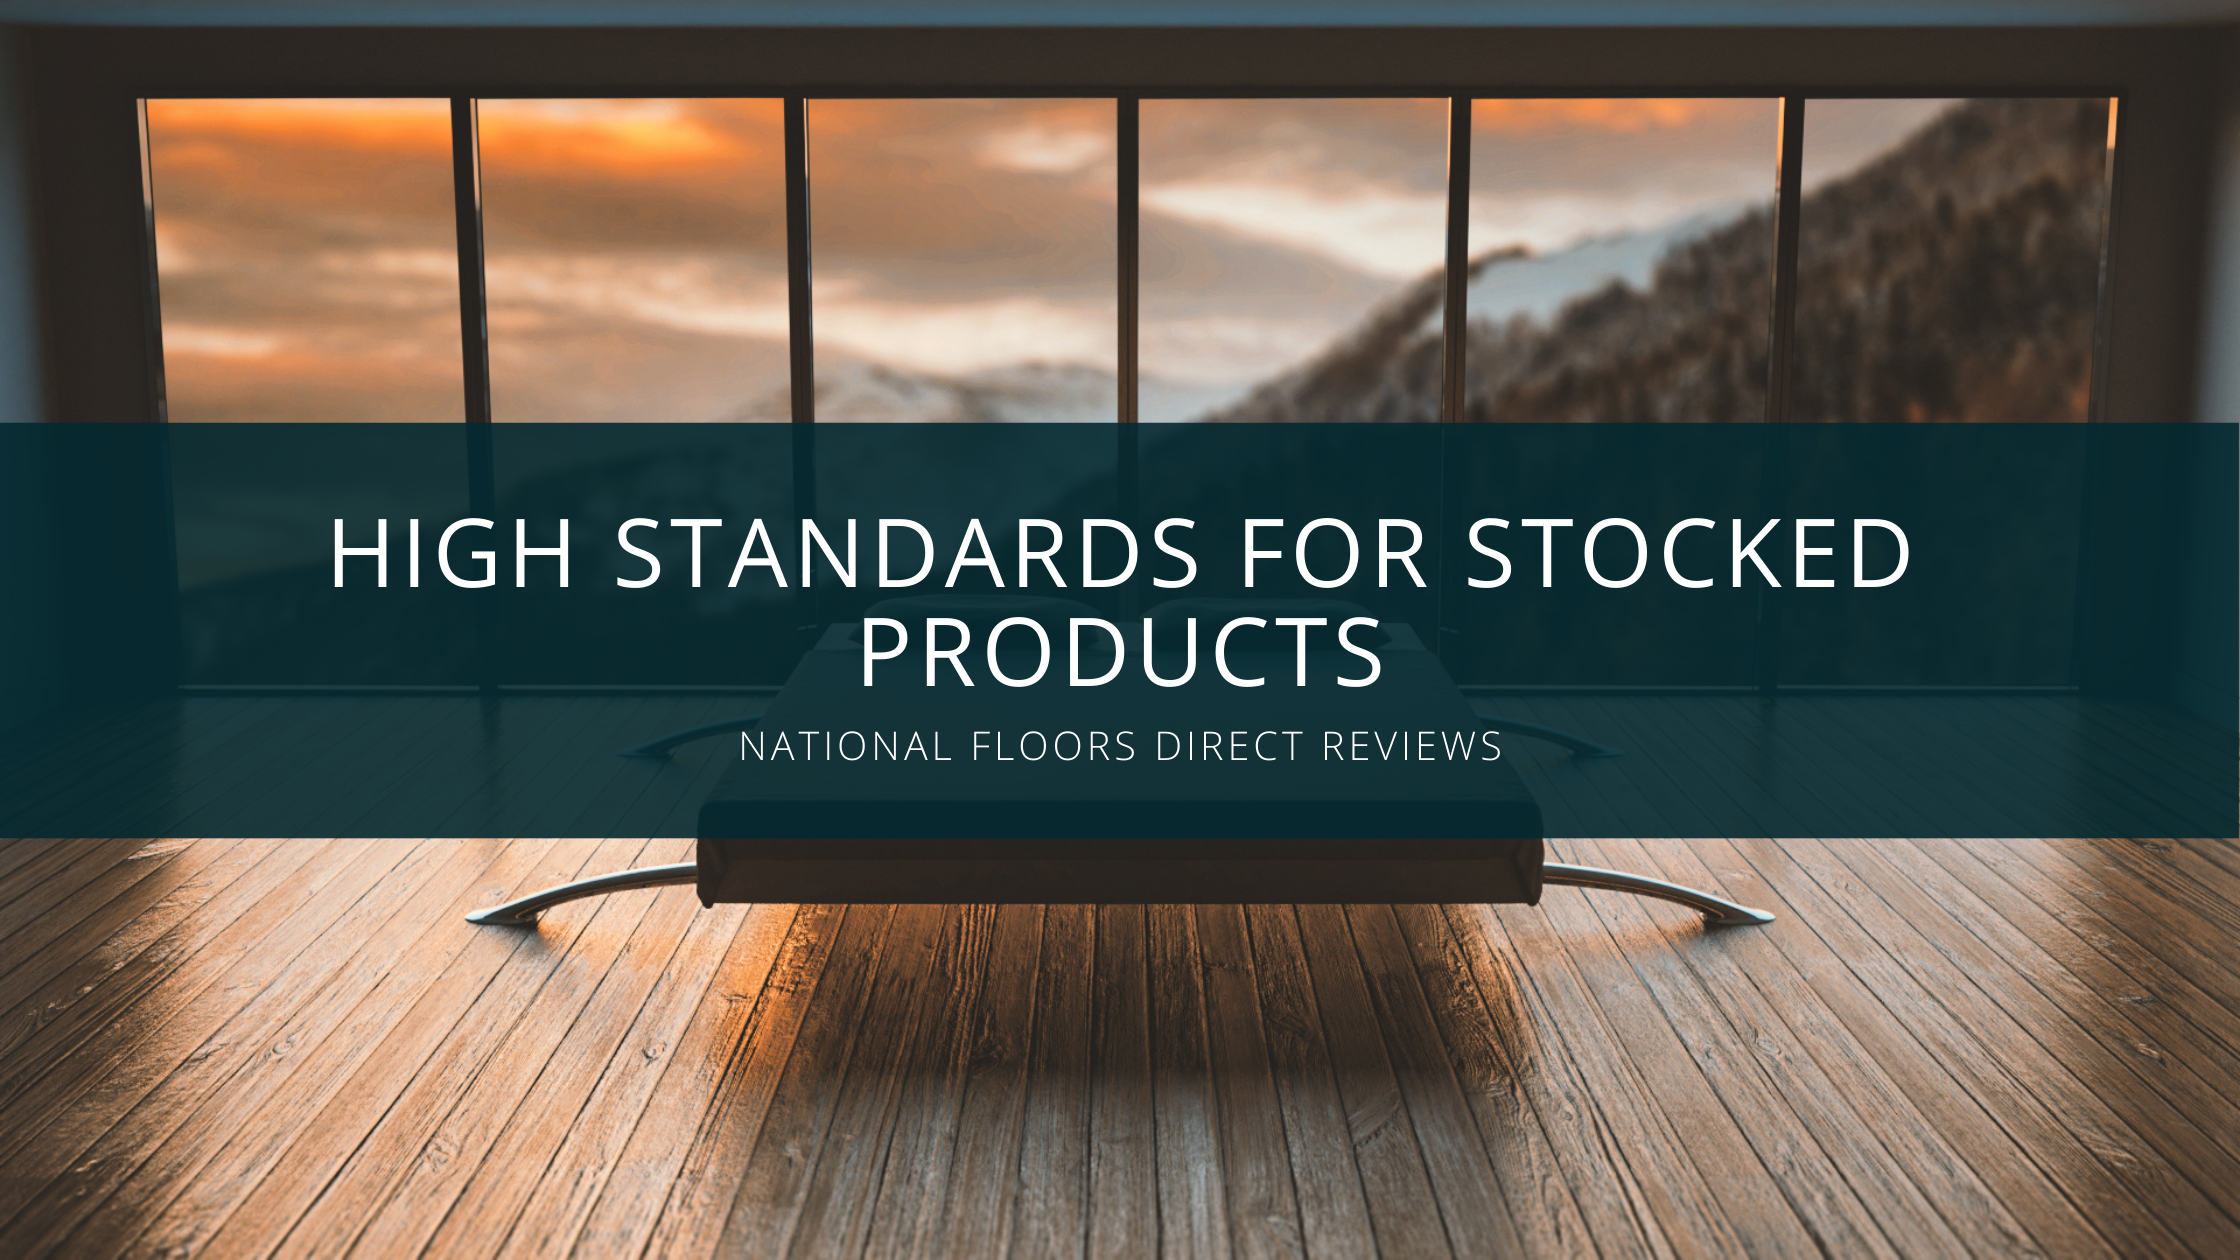 National Floors Direct Reviews Its High Standards for Stocked Products